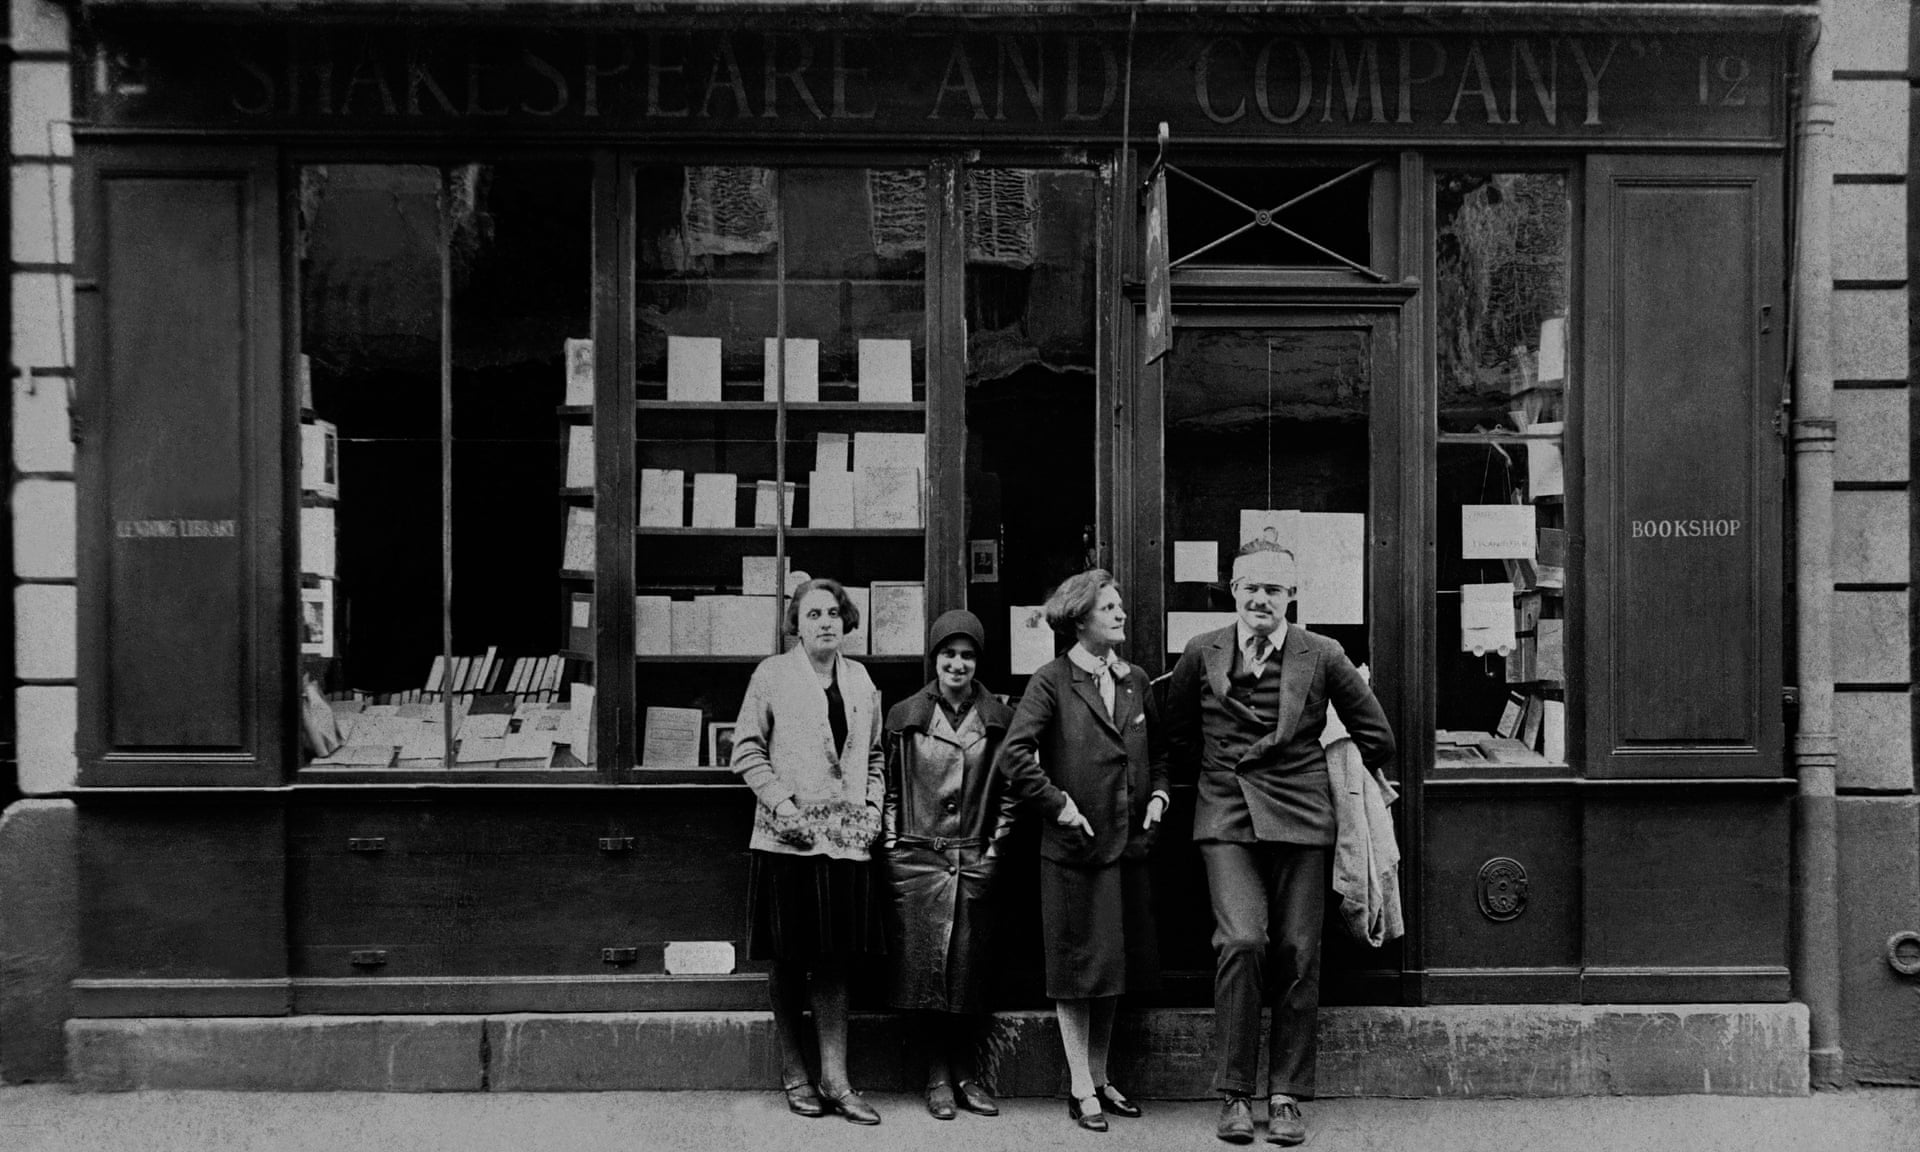 Hemingway (right) with Sylvia Beach (third from left) and two others outside Shakespeare and Company in 1926. From the Guardian.